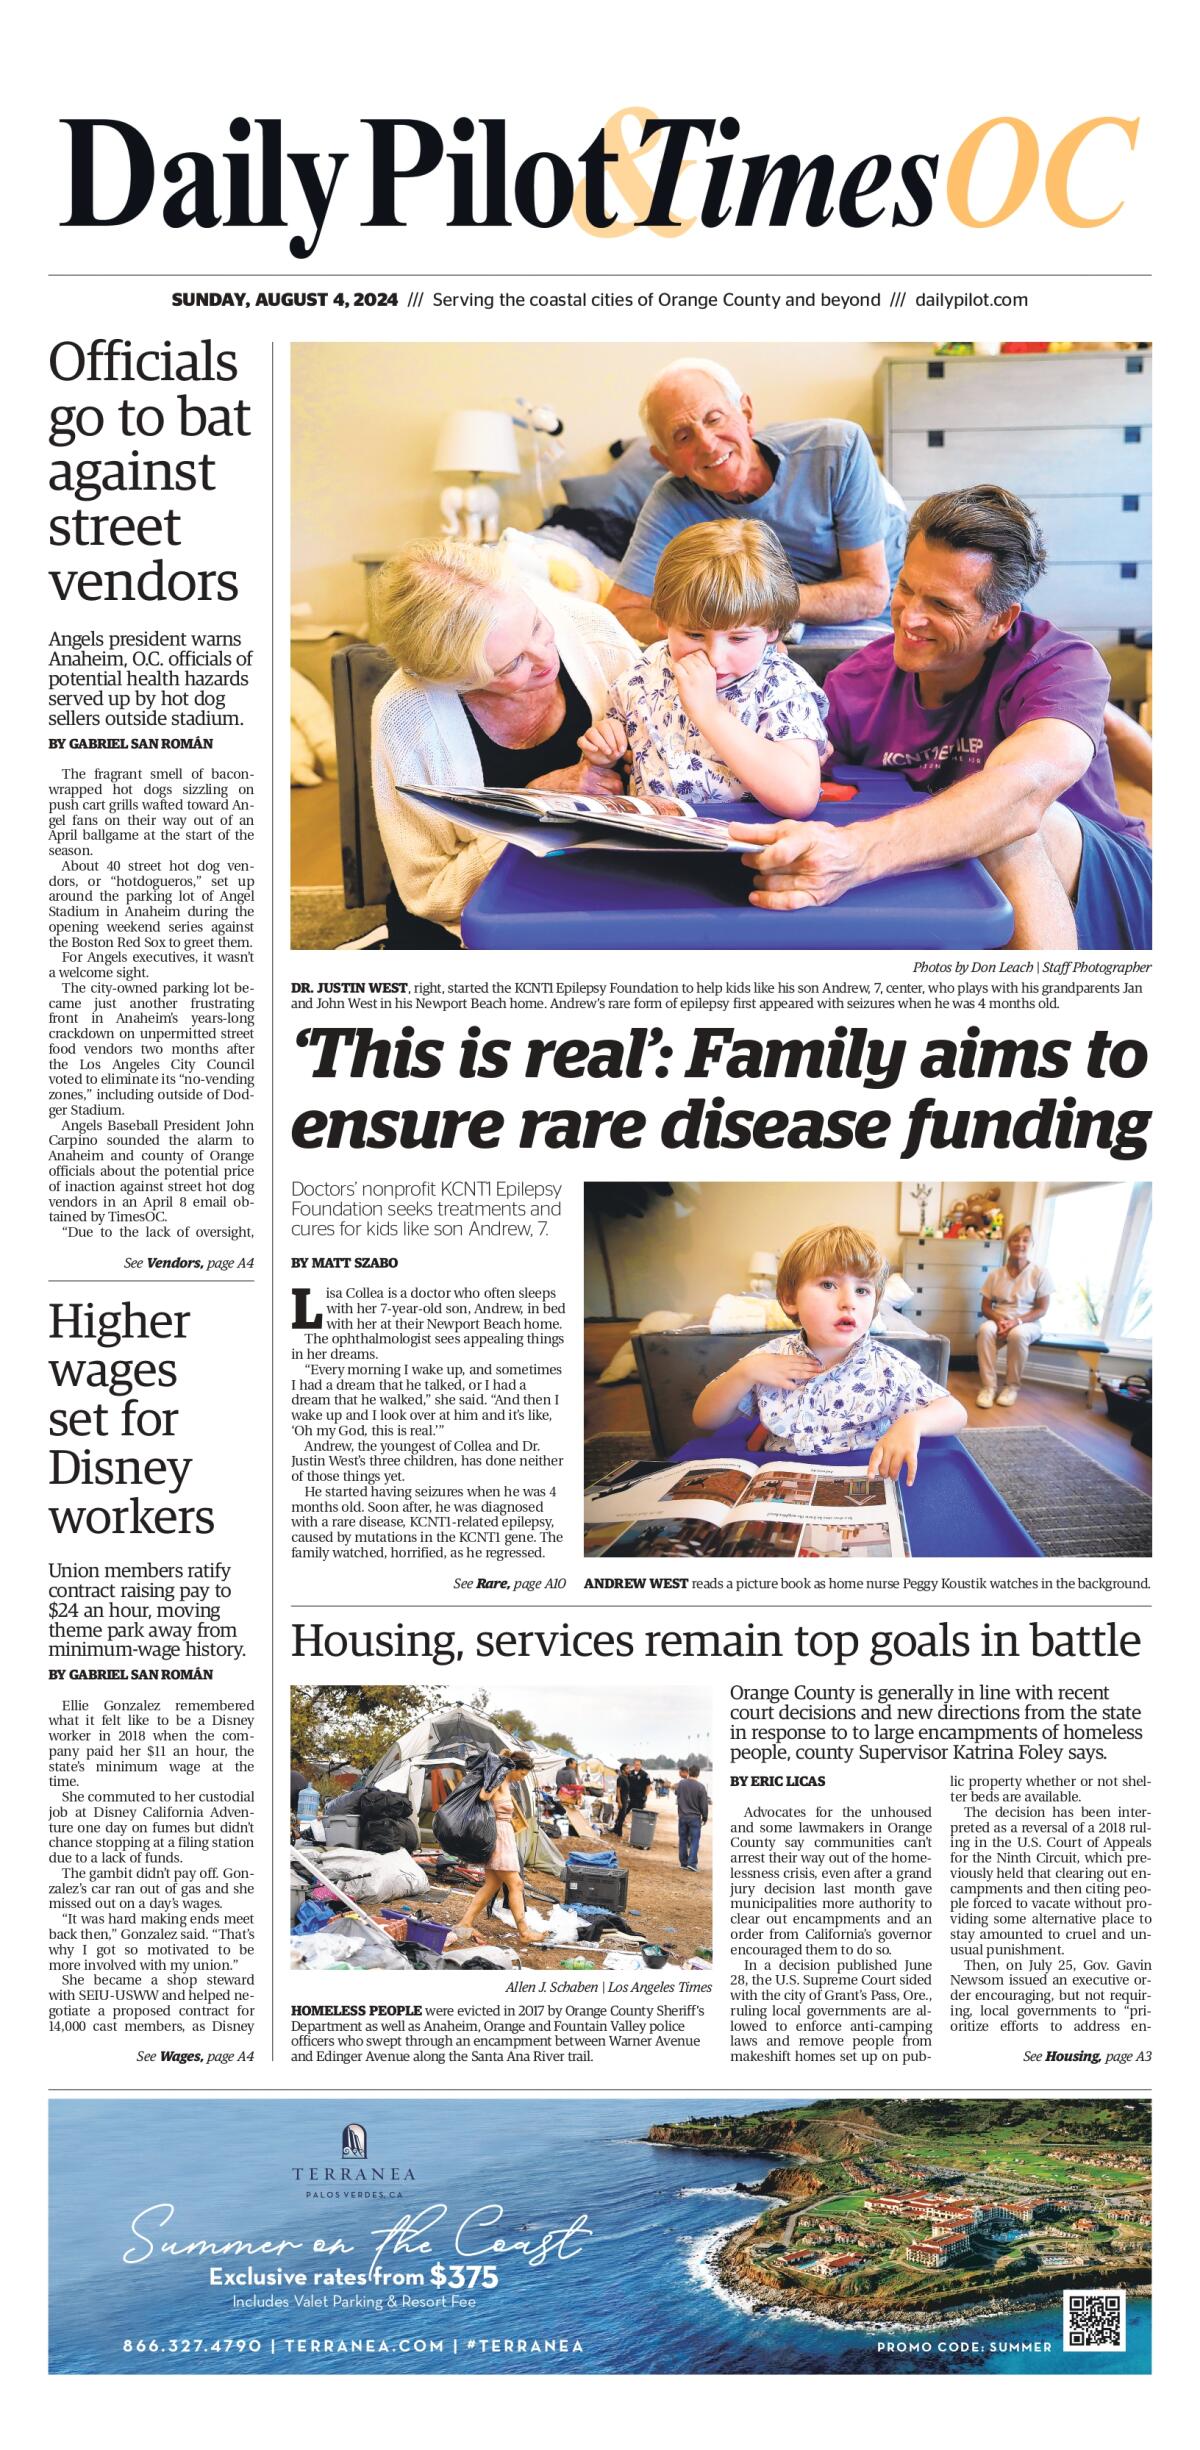 Front page of the Daily Pilot & TimesOC e-newspaper for Sunday, Aug. 4, 2024.